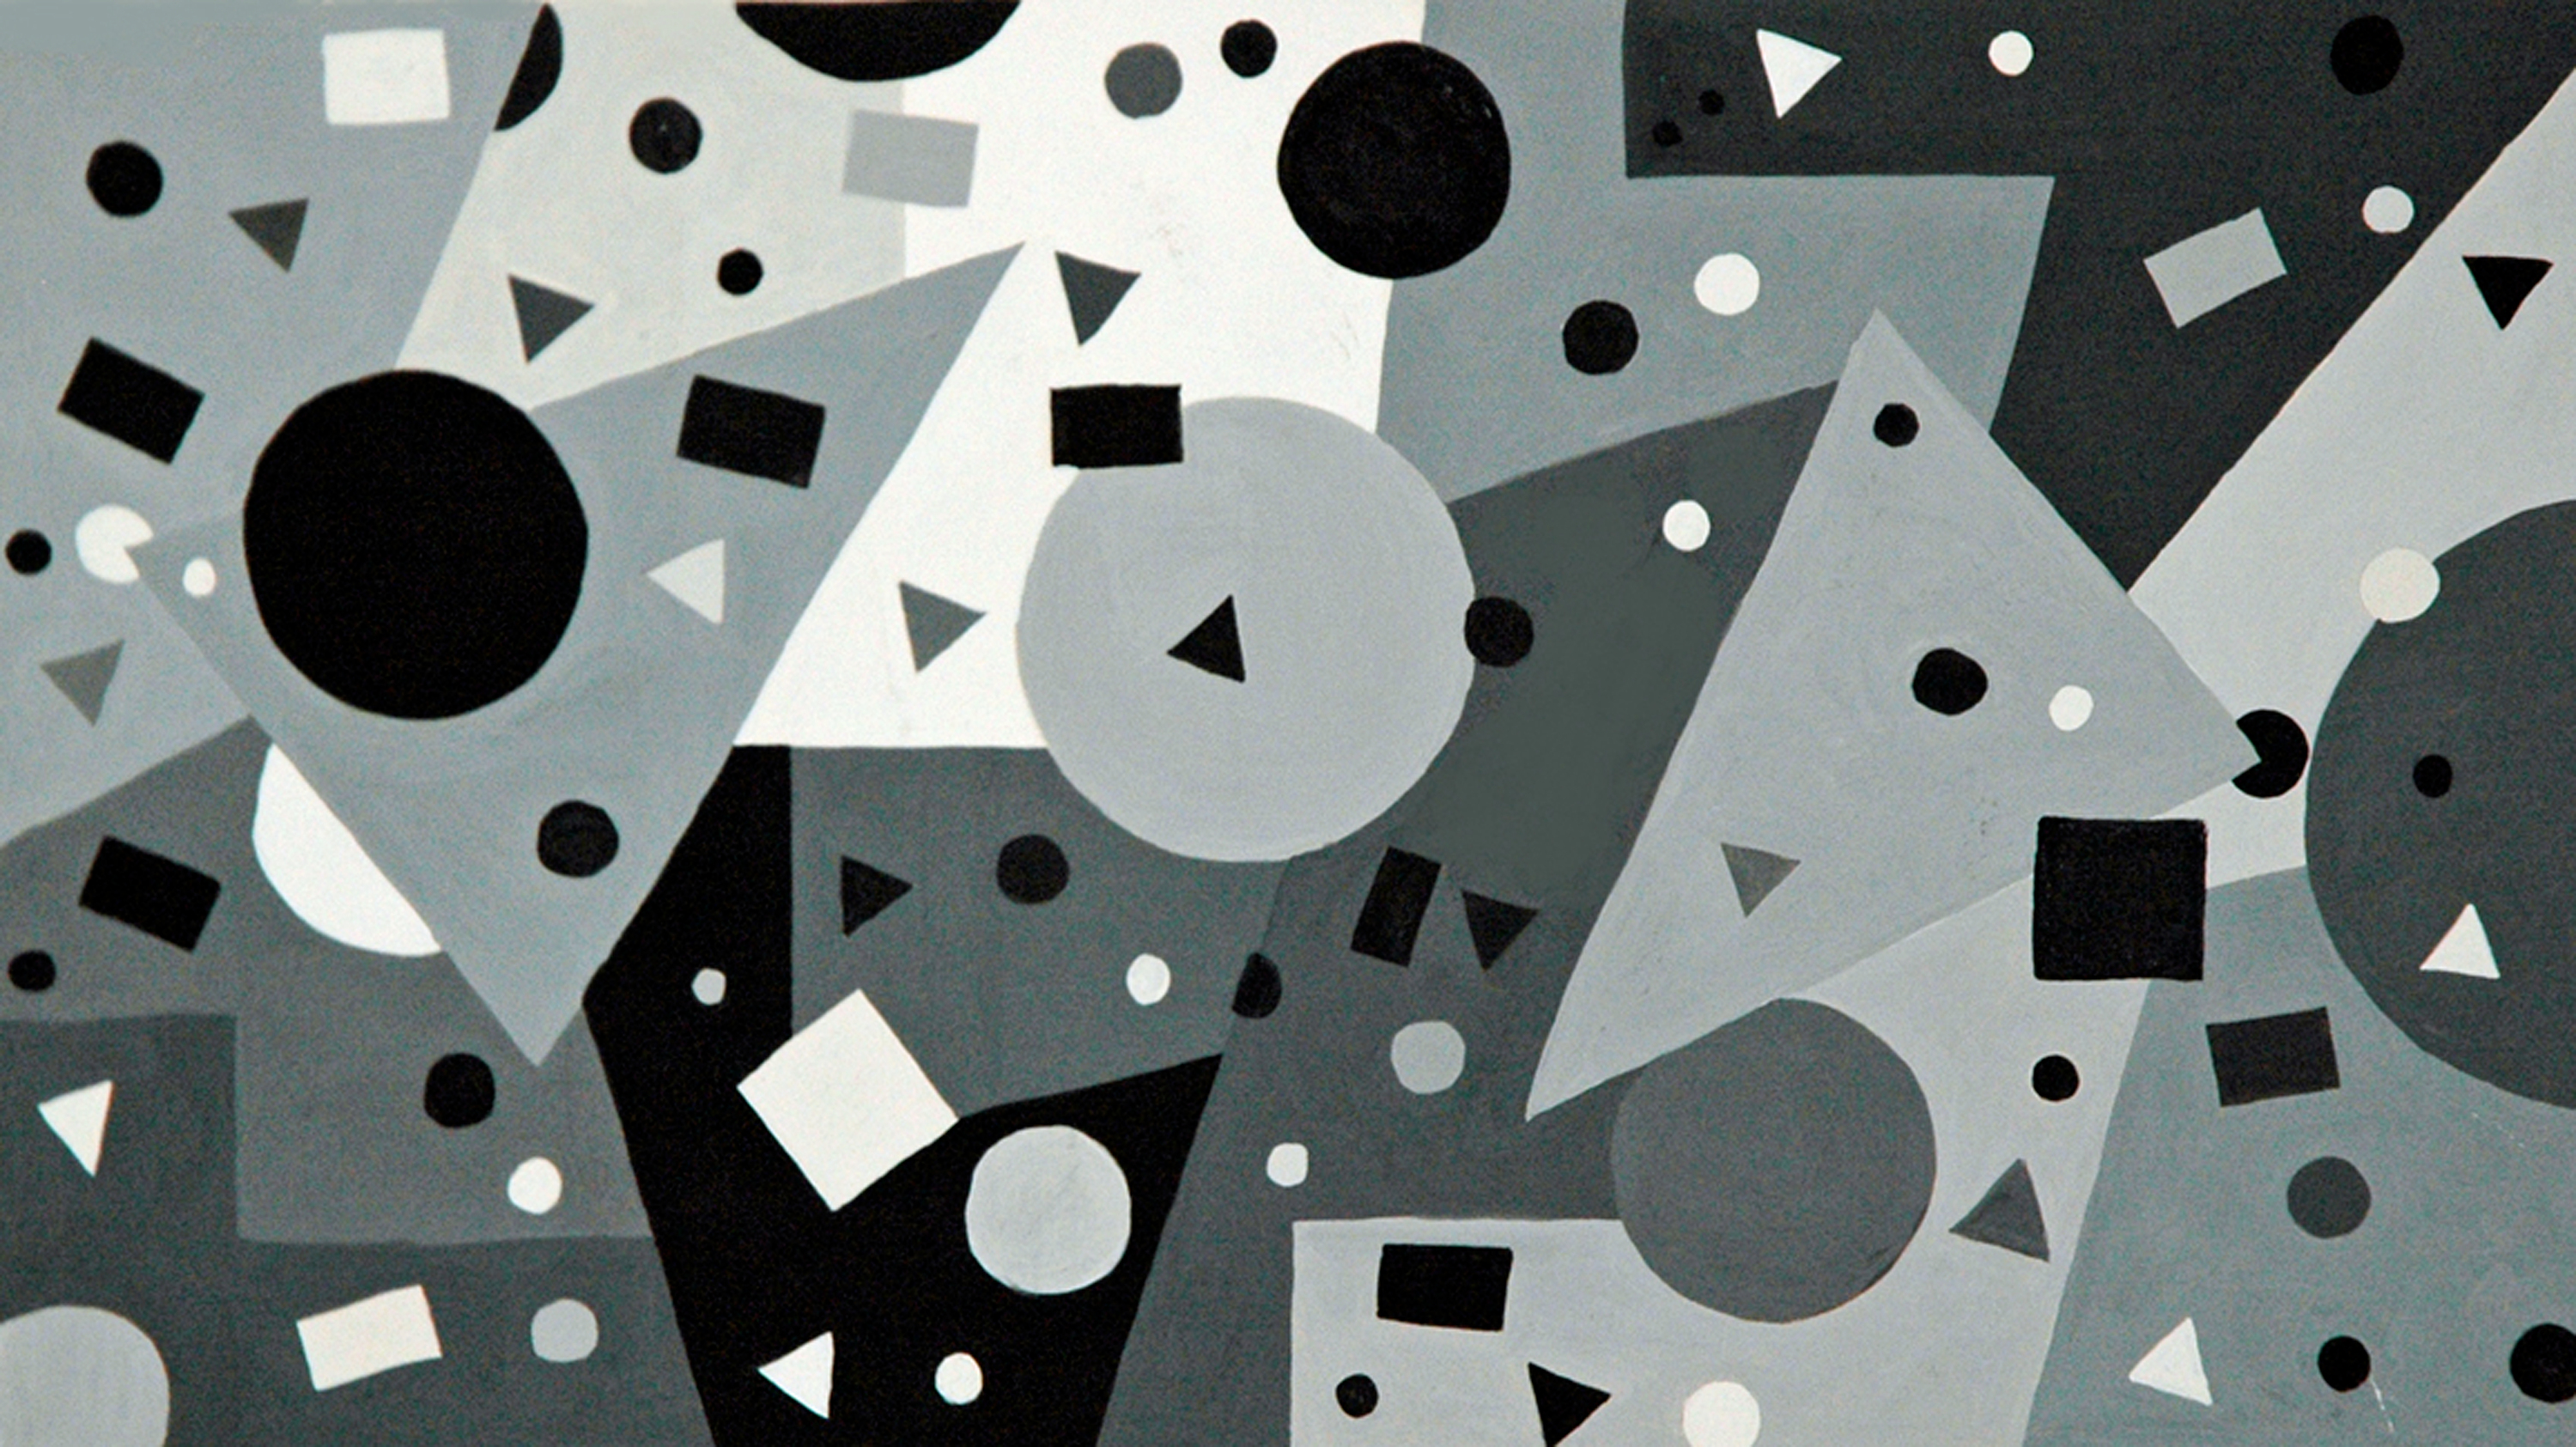 Shades of gray   9 22 x 16 22   gouache on paper mounted on board   resin coat cdvoez